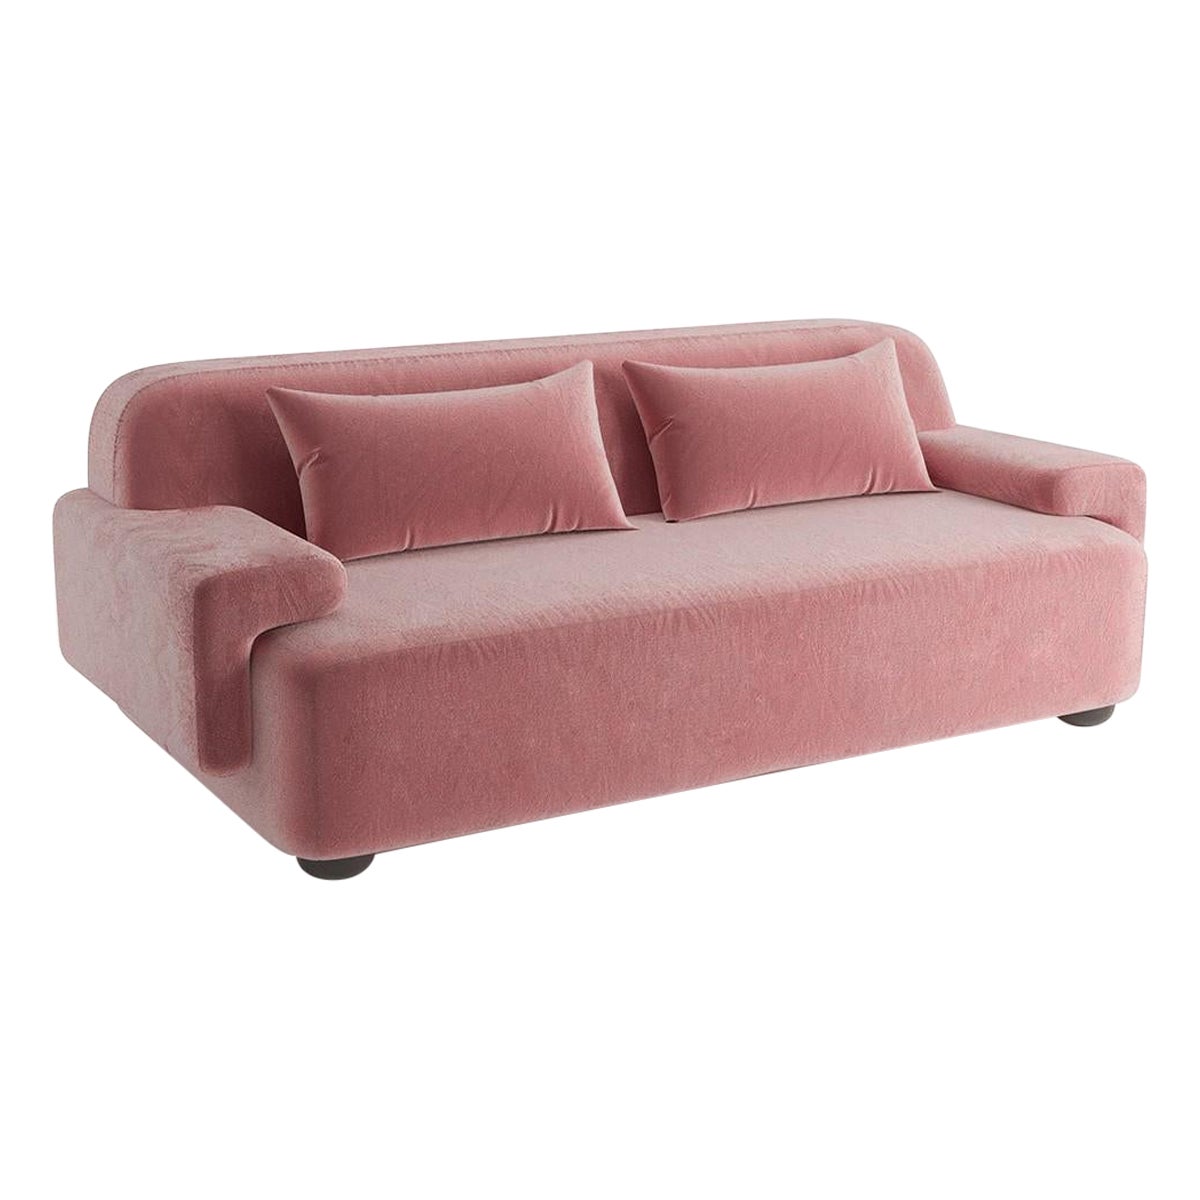 Popus Editions Lena 2.5 Seater Sofa in Pink Verone Velvet Upholstery For Sale